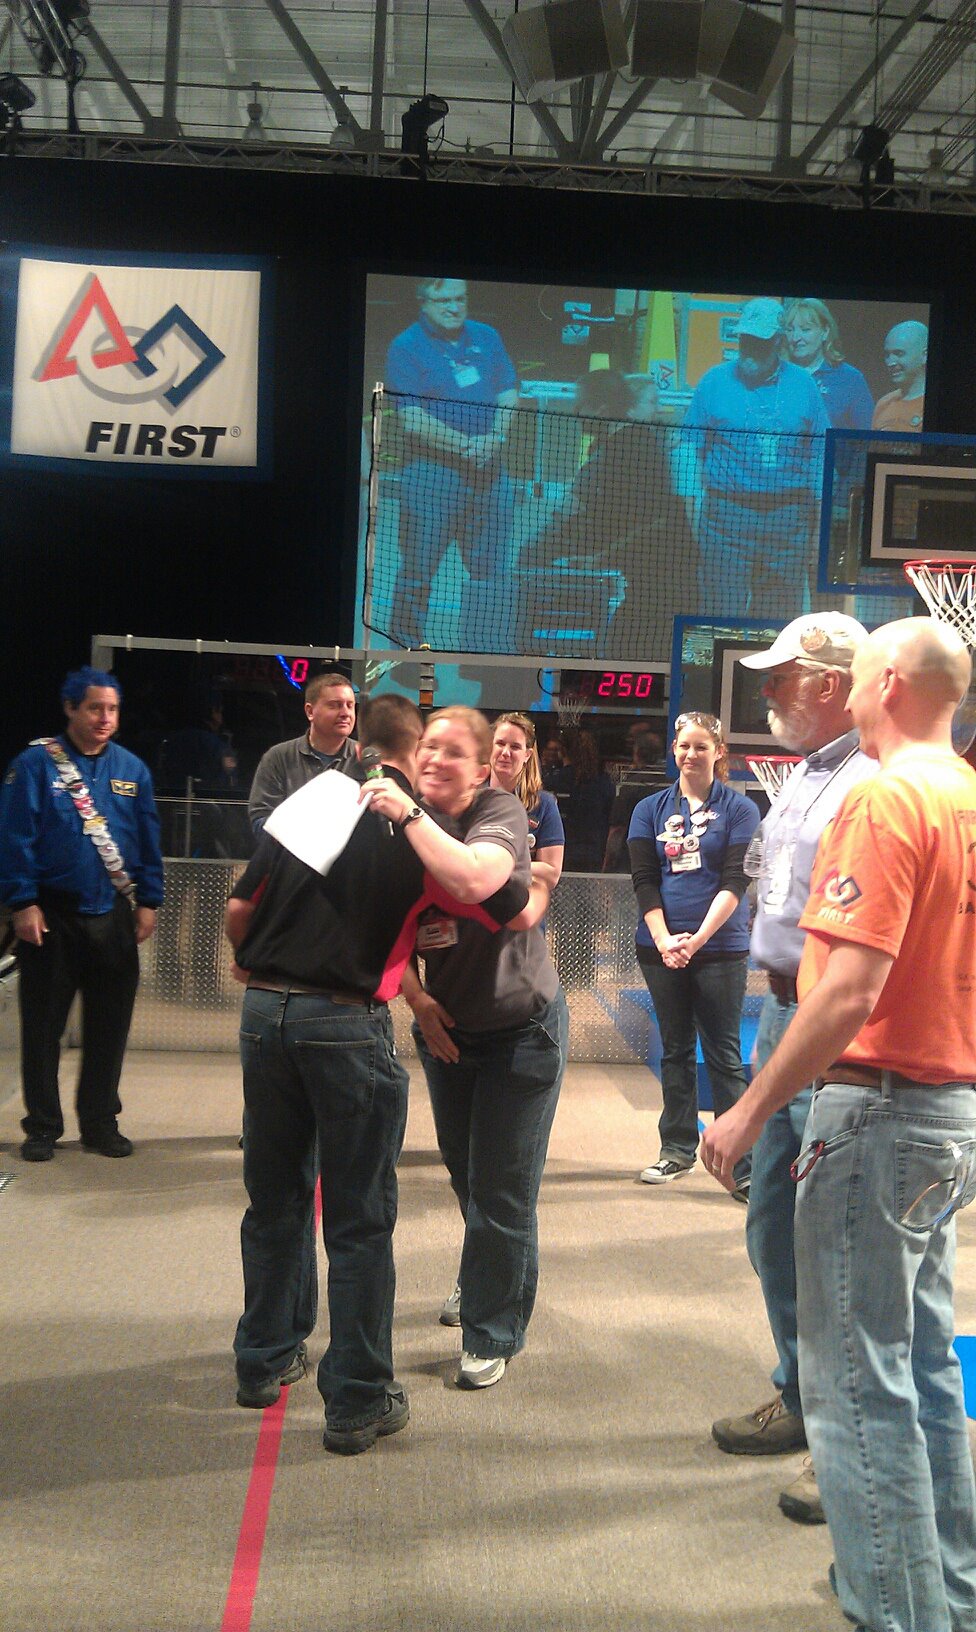 Tenrehte CEO Jennifer Indovina @ Rebound Rumble, the 2012 FIRST Robotics Competition at RIT